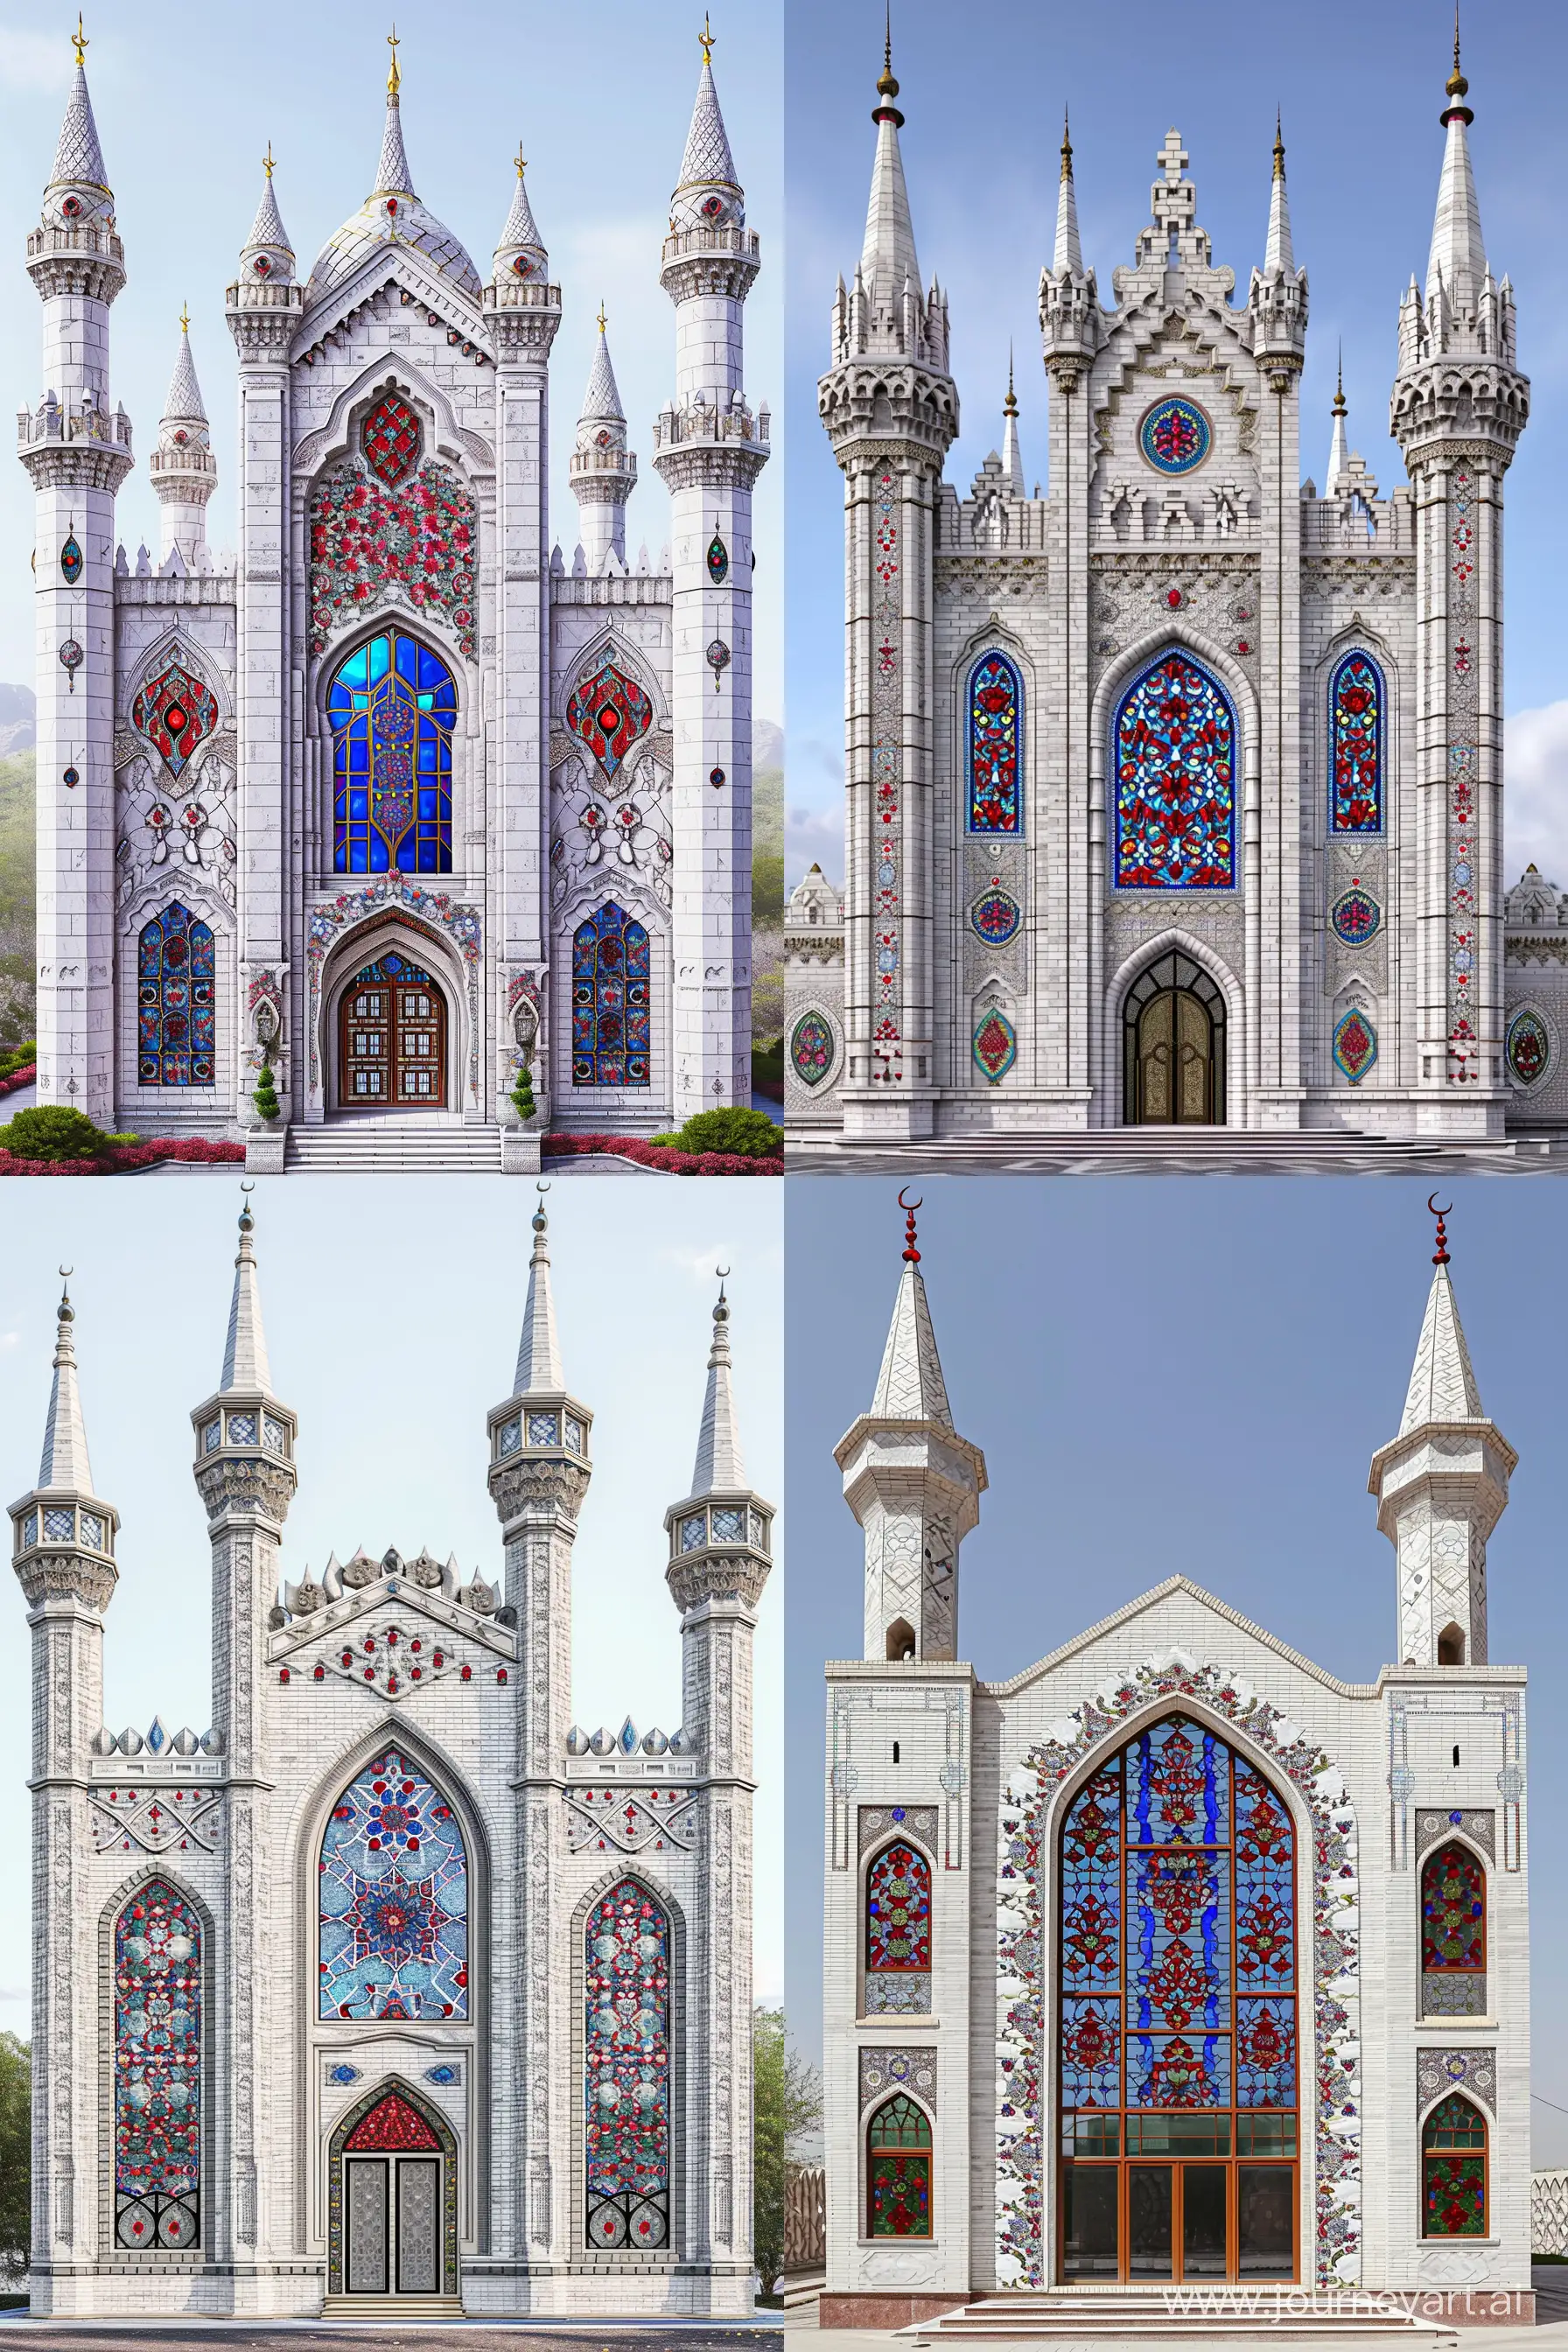 a Timurid style mosque, White marbled brick exterior, tall iwan, stained glass windows, red blue persian floral motifs on spandrels, red blue gems and rubies embedded on arabesque ornaments, thin spires, full view, front view --ar 10:15